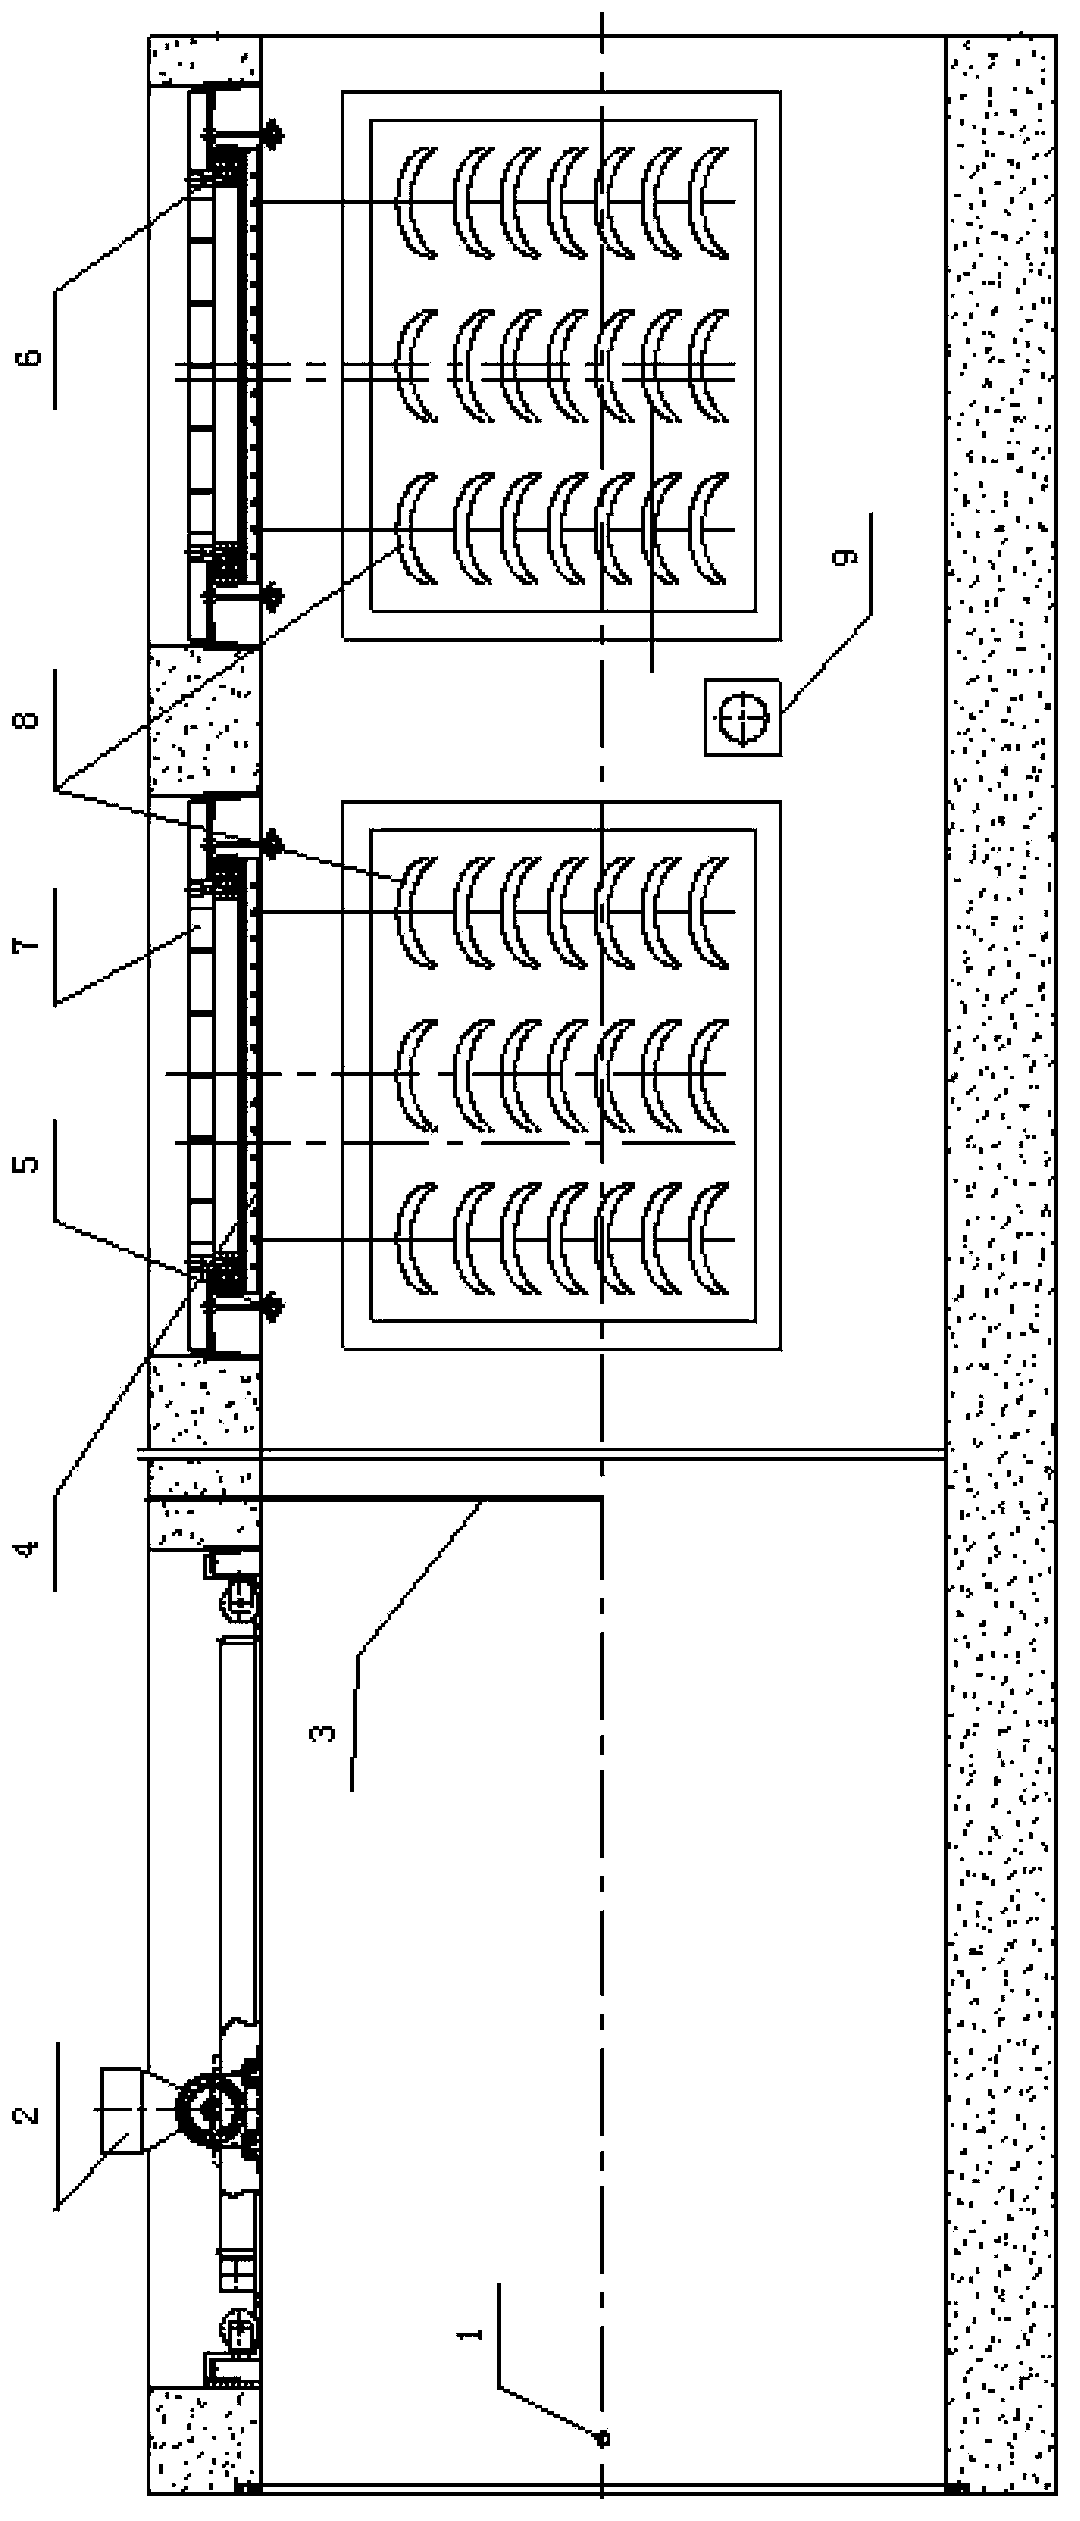 Artificial contamination deposition characteristic test system